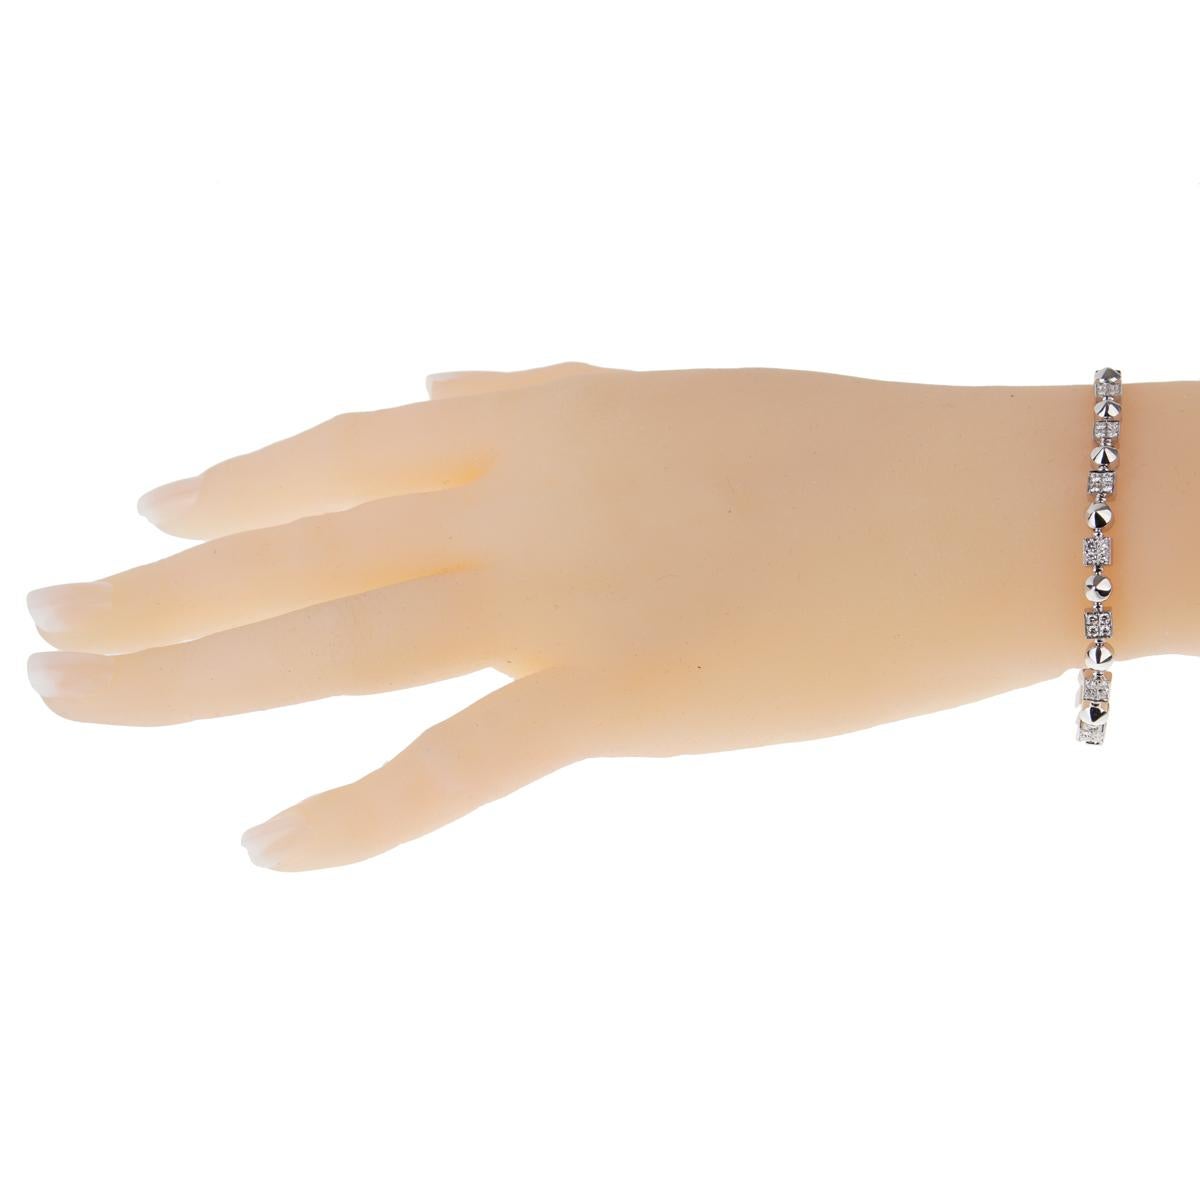 A fabulous and authentic Lucea diamond tennis bracelet from Bulgari. This tennis bracelet features the finest Bulgari round brilliant cut diamonds set in 18k white gold for a classic and timeless look. Diamond Weight: 1.70ct appx

Length: 7.25